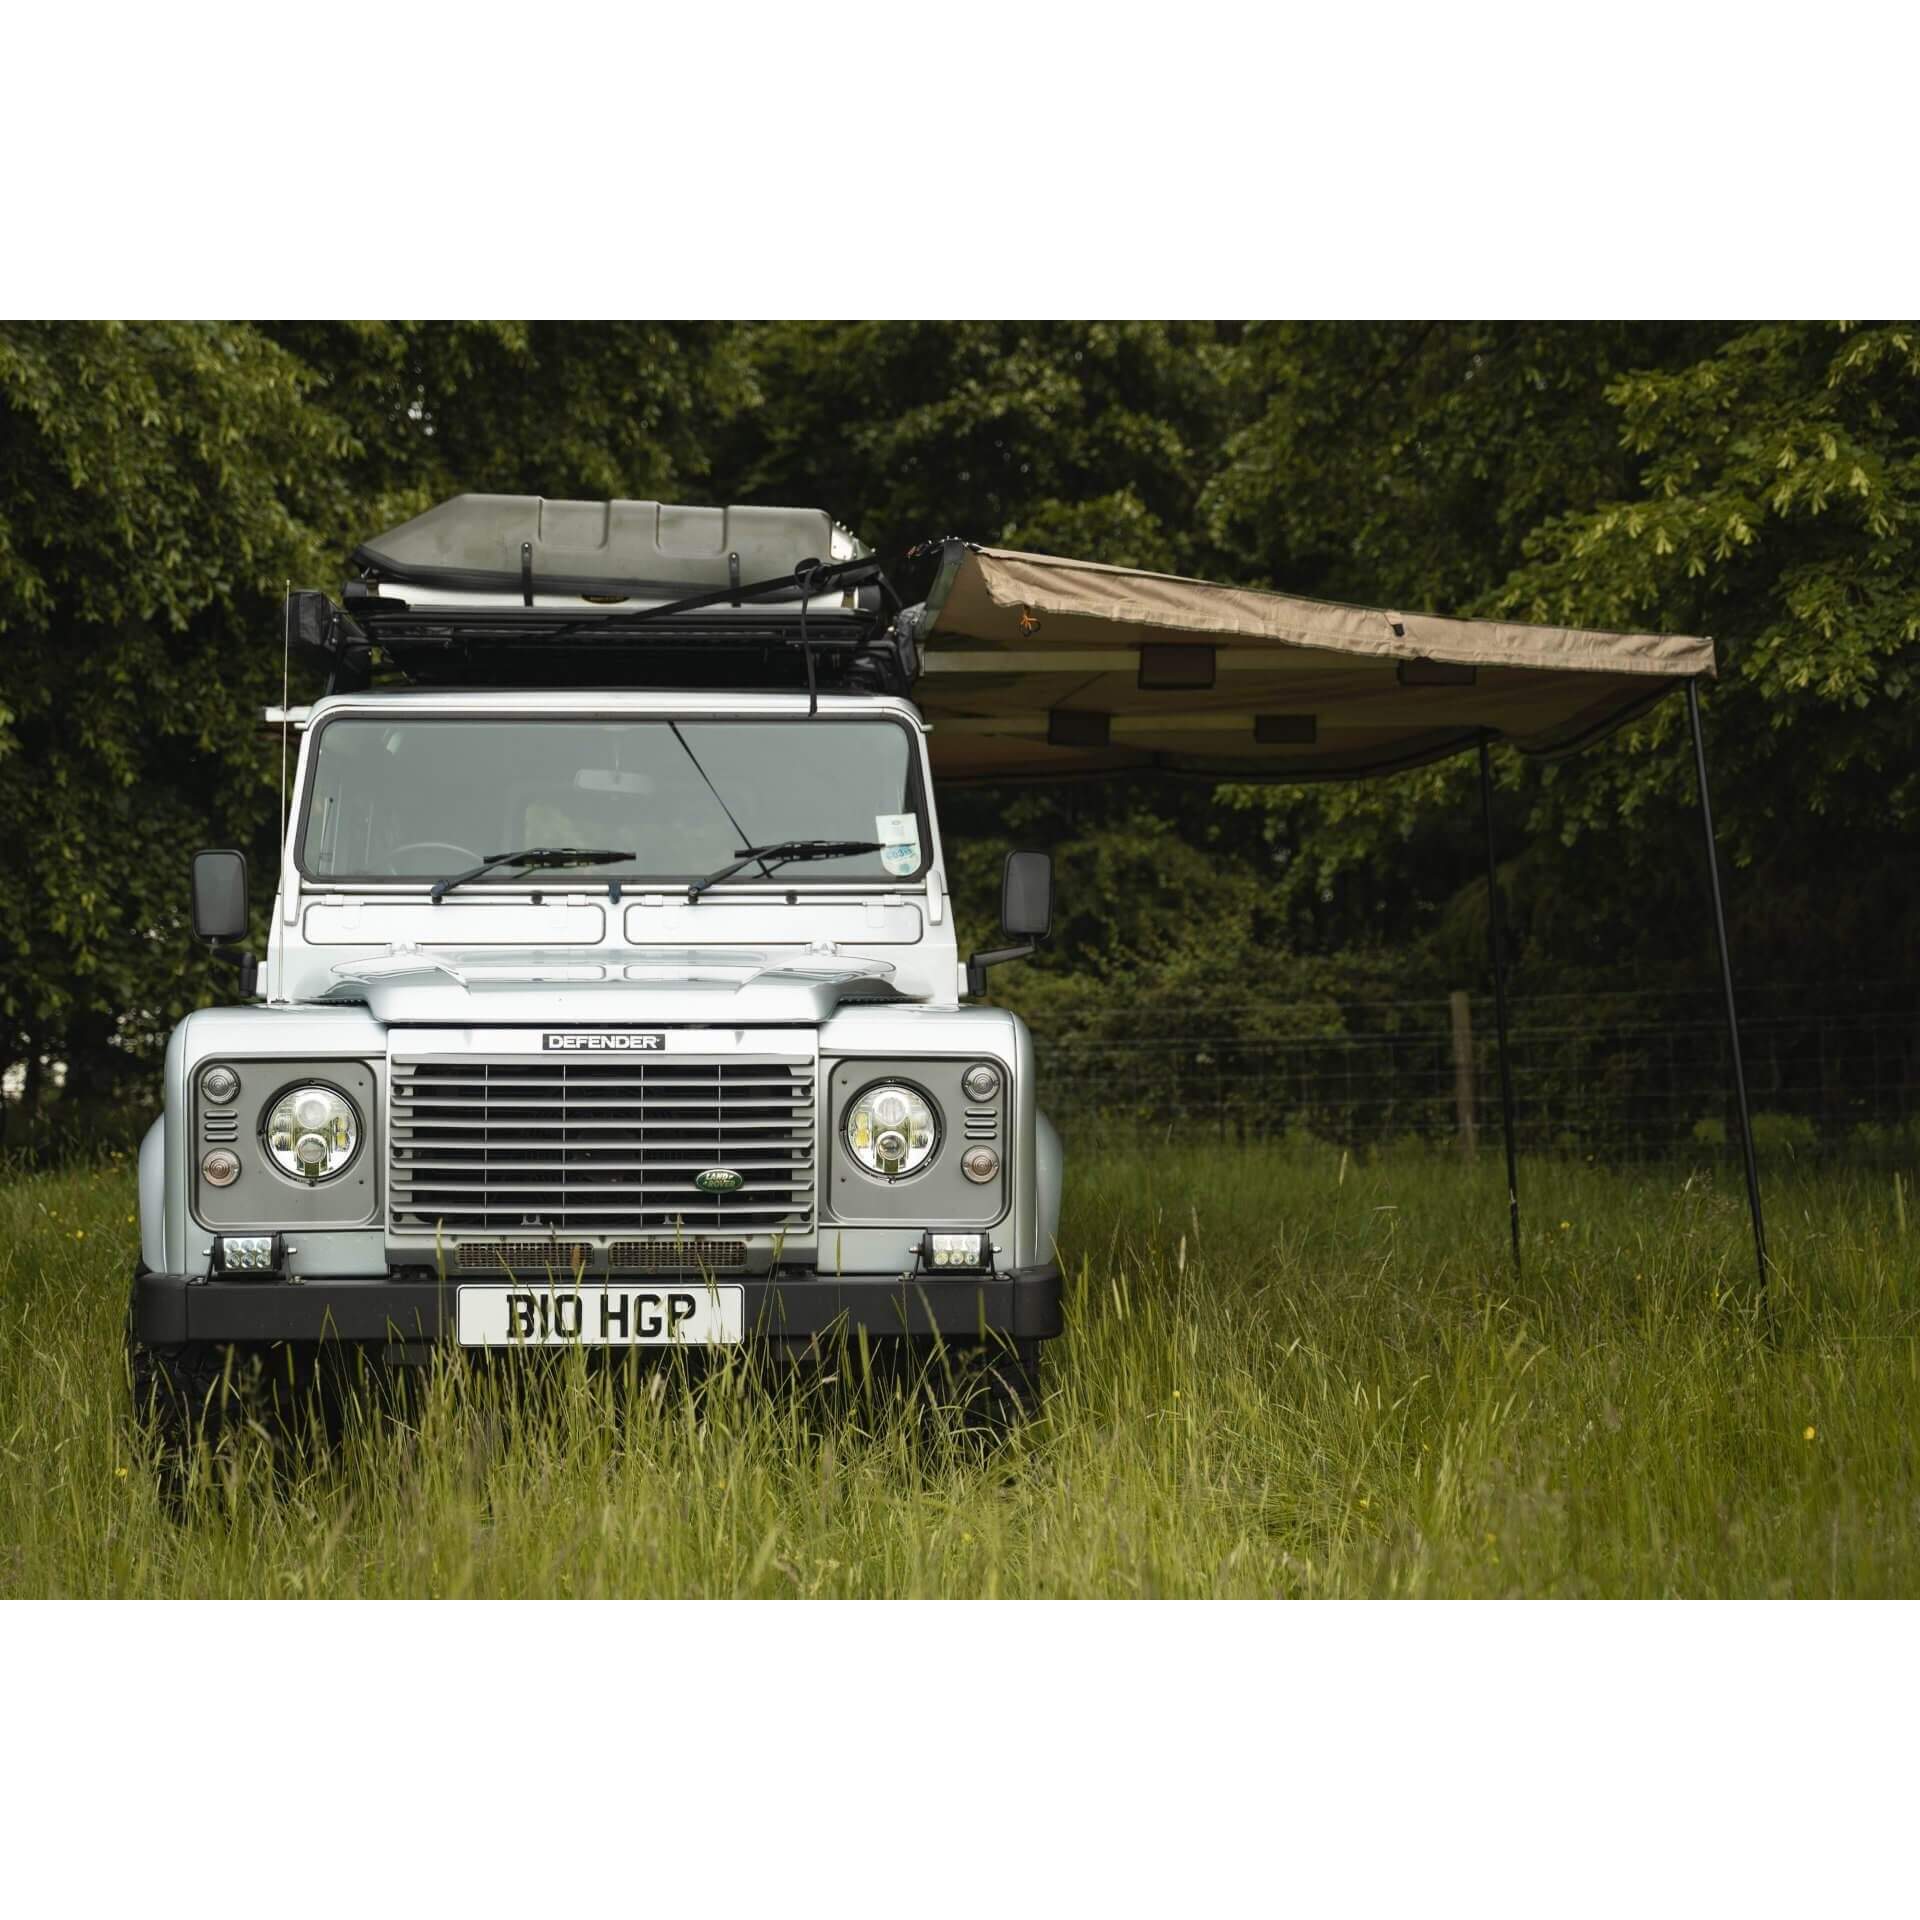 270 Degree Granite Grey Overland Expedition Foldout Vehicle Camping Side Awning -  - sold by Direct4x4